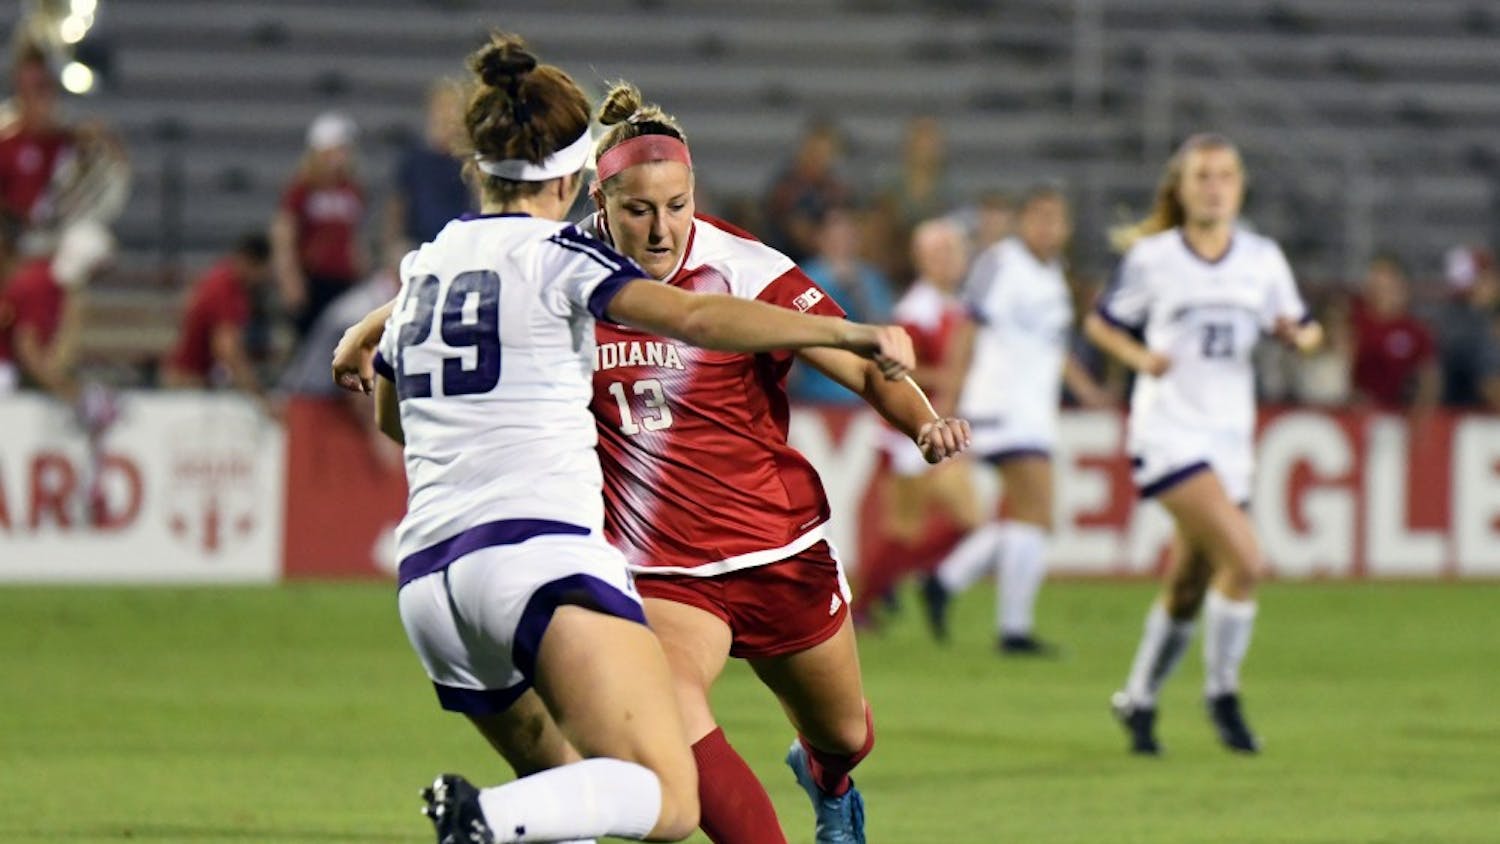 Junior forward Maya Piper scores a goal in the first minute against Northwestern Thursday evening at Bill Armstrong Stadium. IU lost to Northwestern, 2-1, to fall to 5-5-2 on the season.